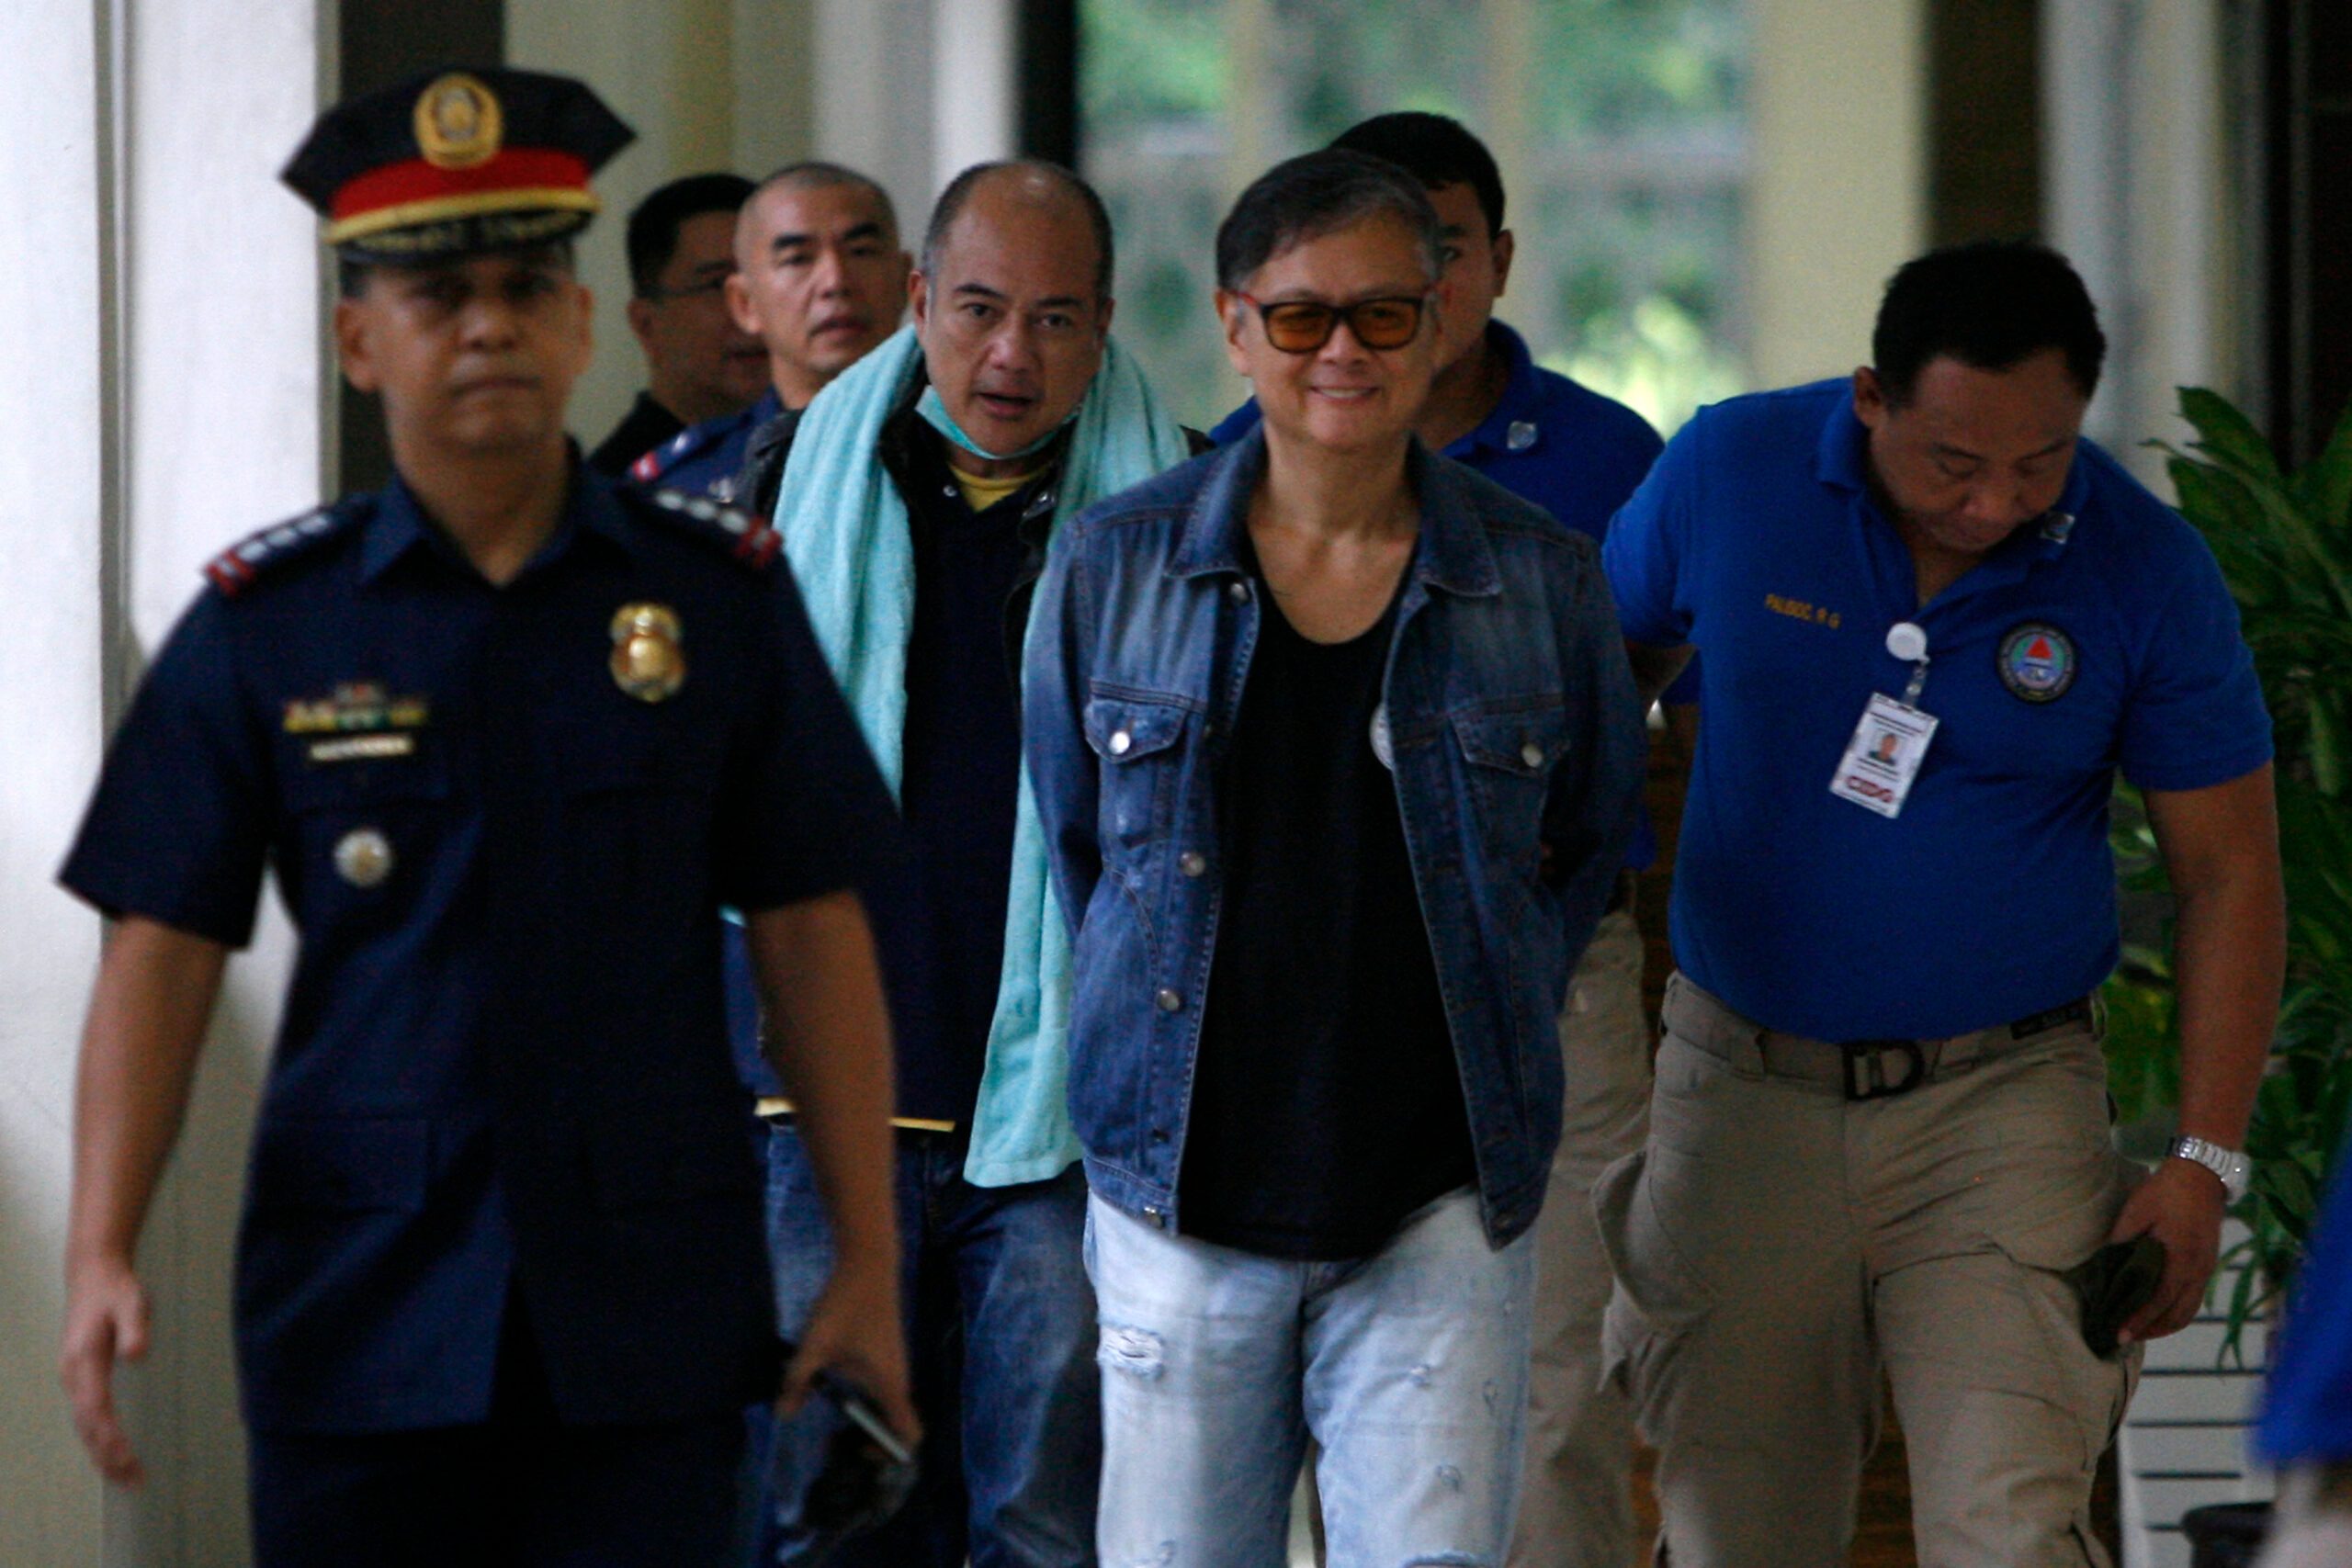 Reyes brothers’ arraignment set for Oct 2